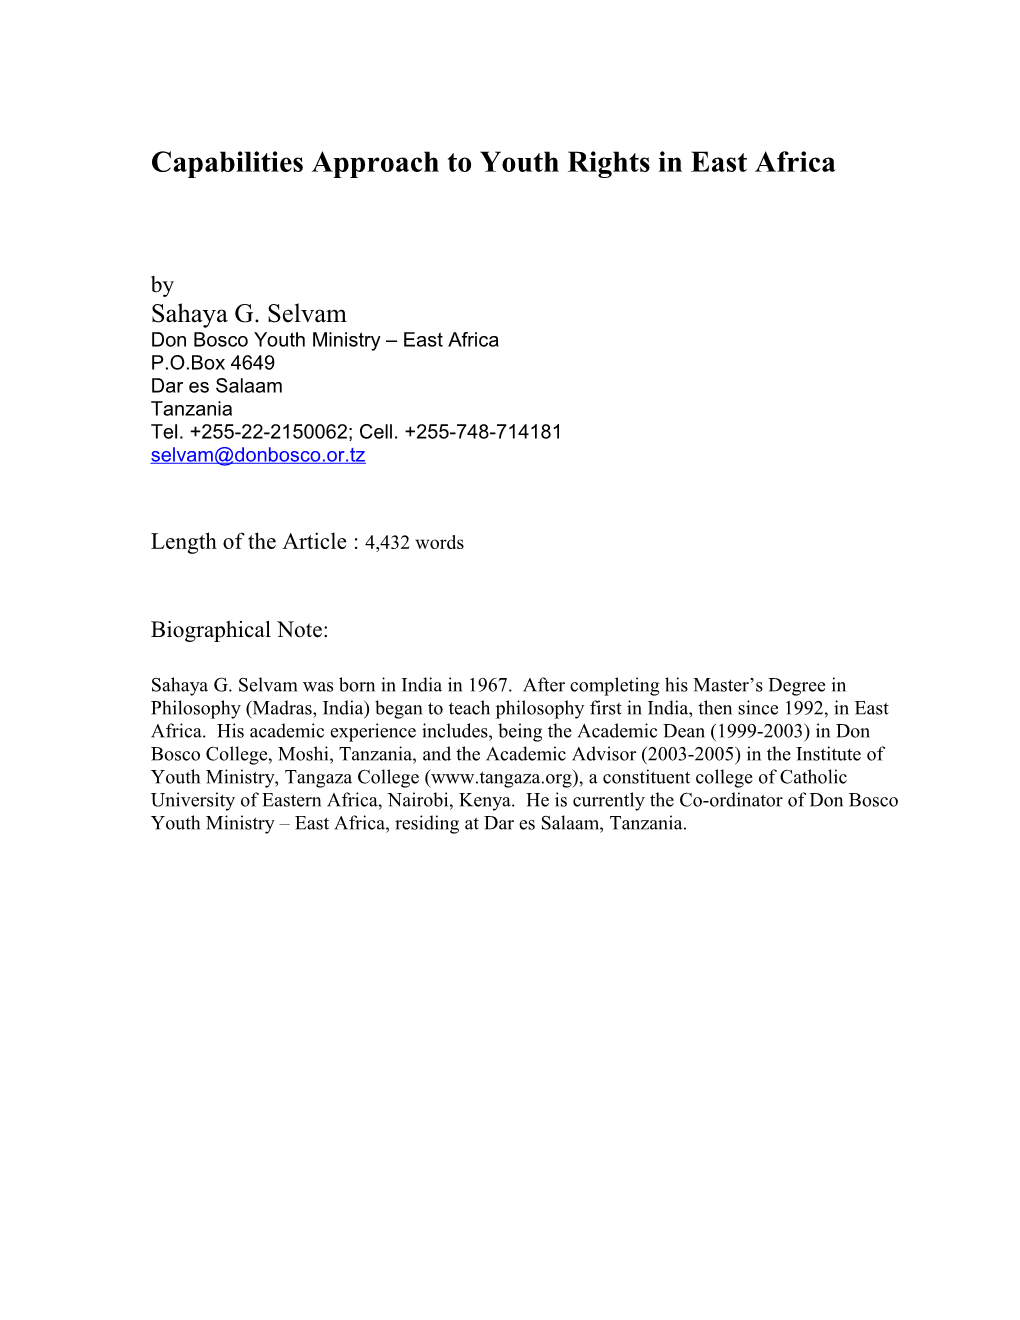 Capabilities Approach to Youth Rights in East Africa